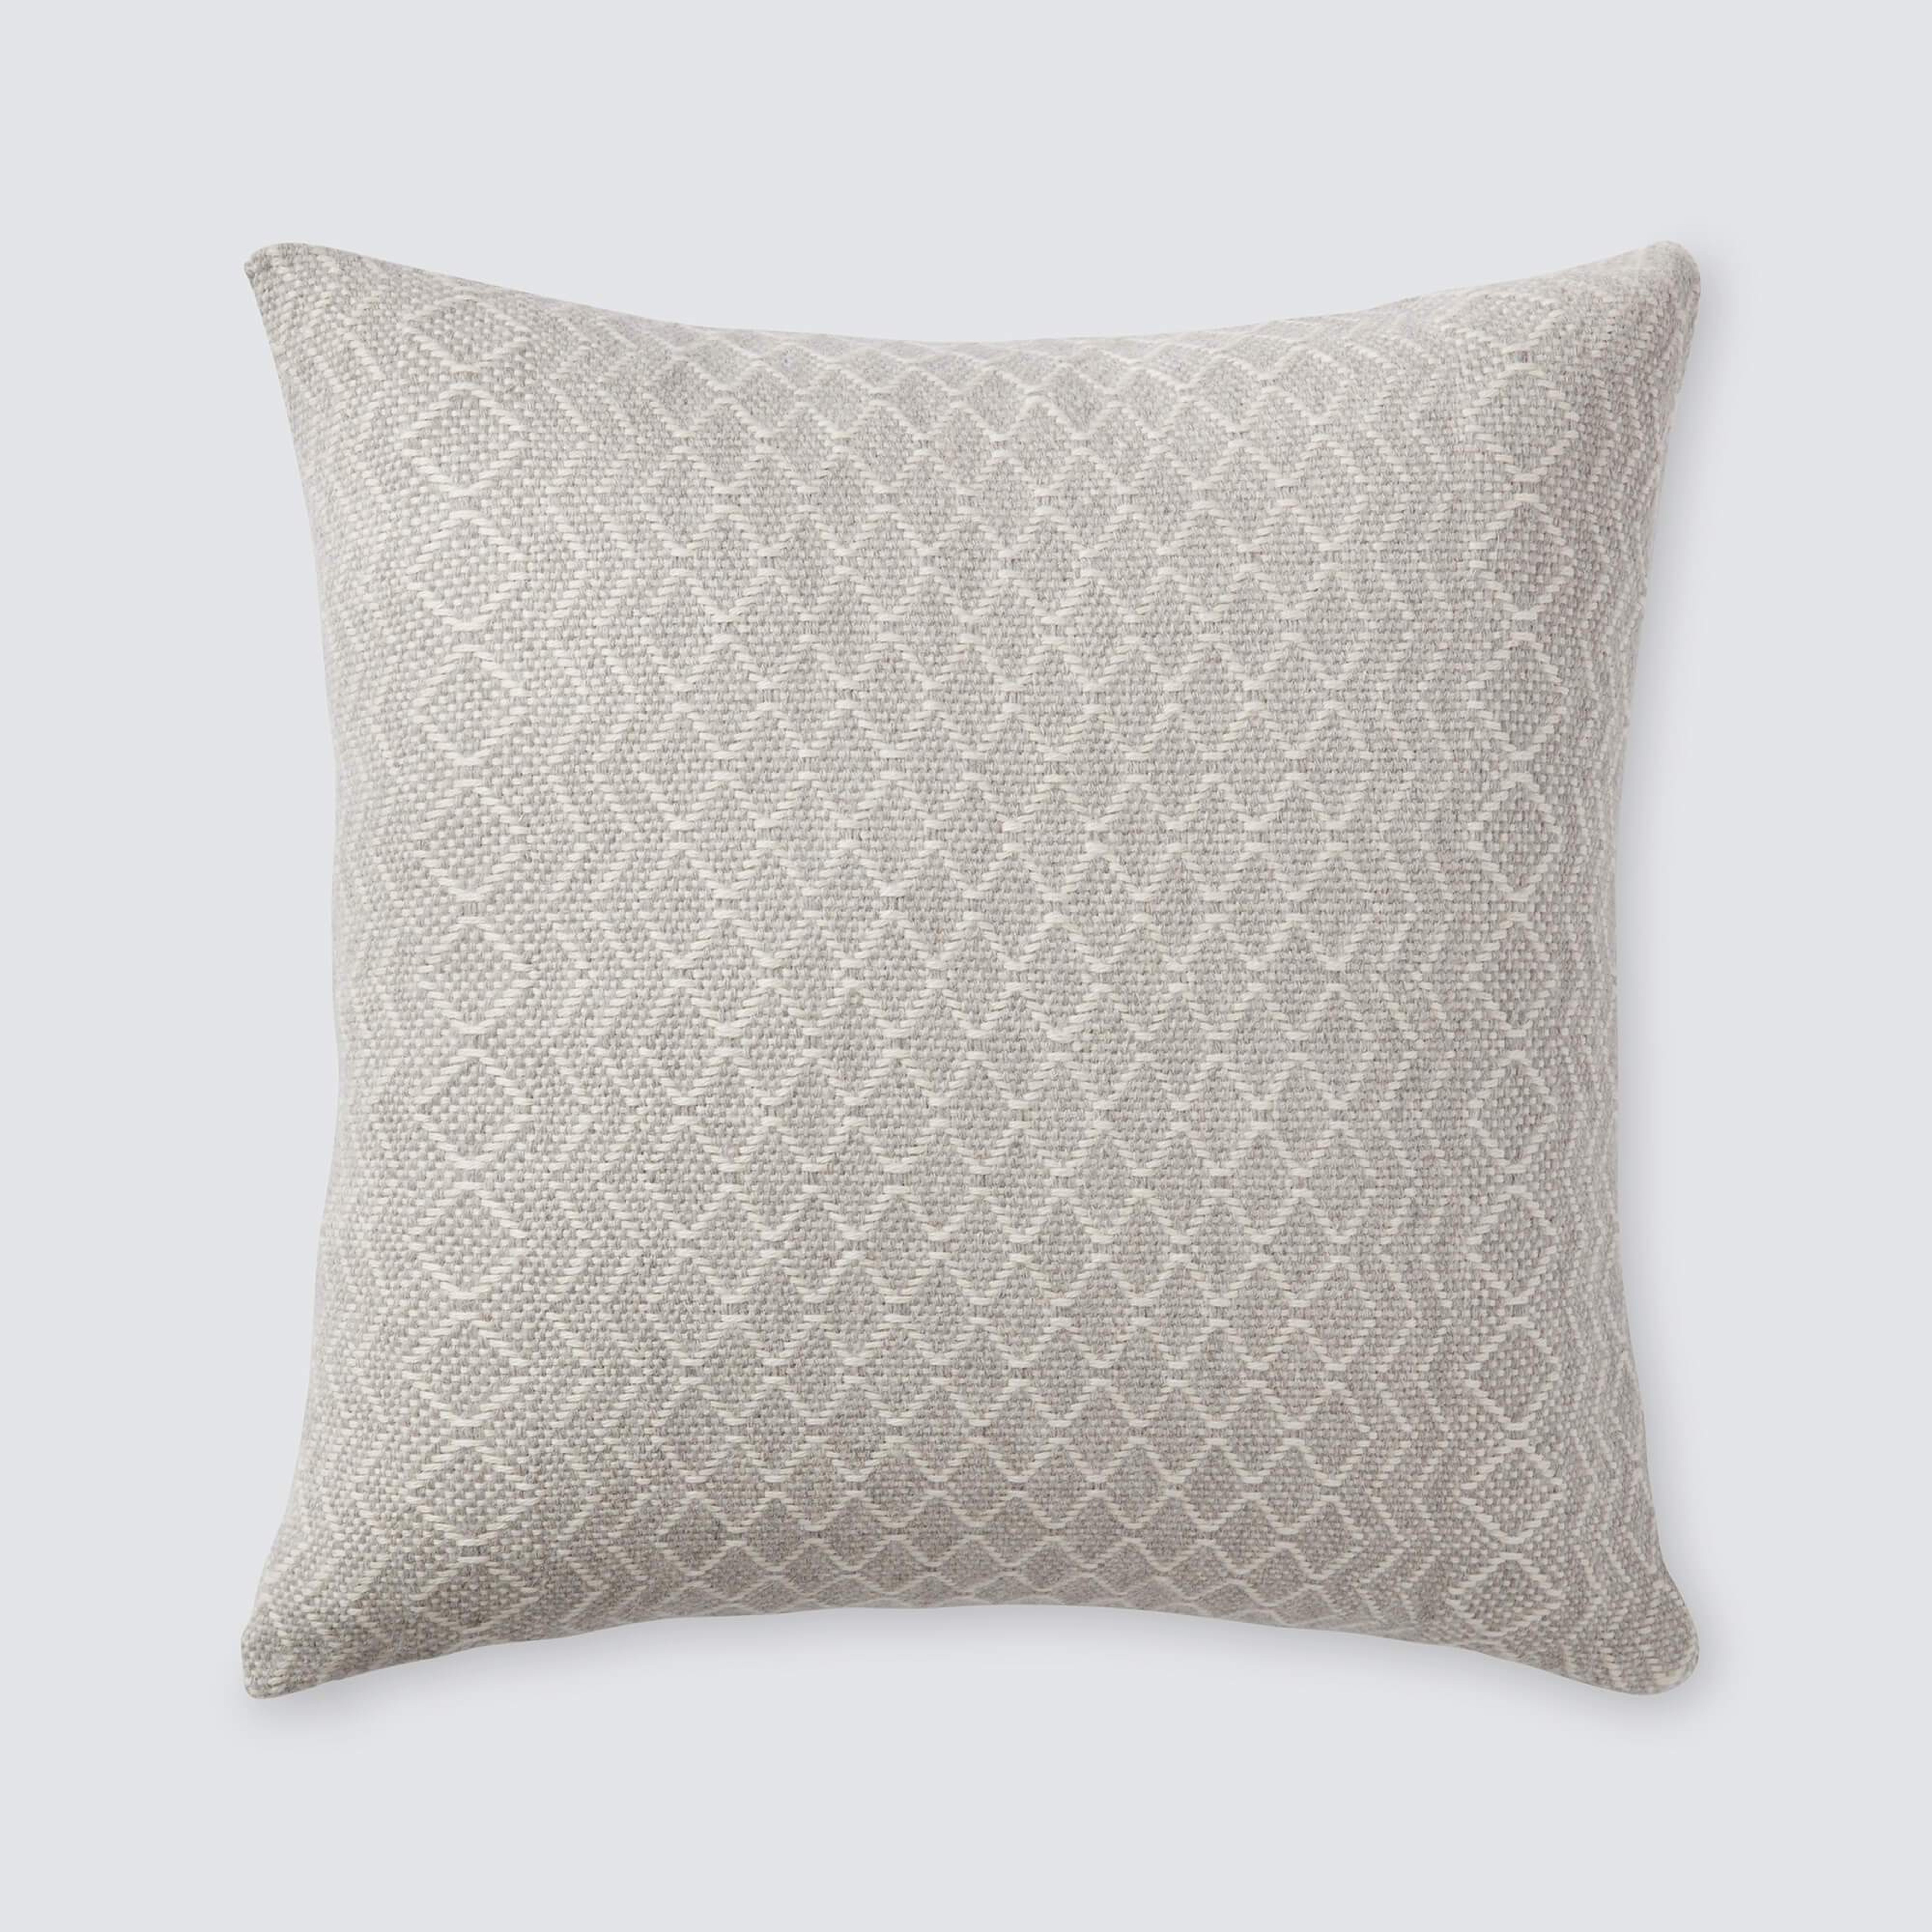 Milagro Pillow - Light Grey By The Citizenry - The Citizenry